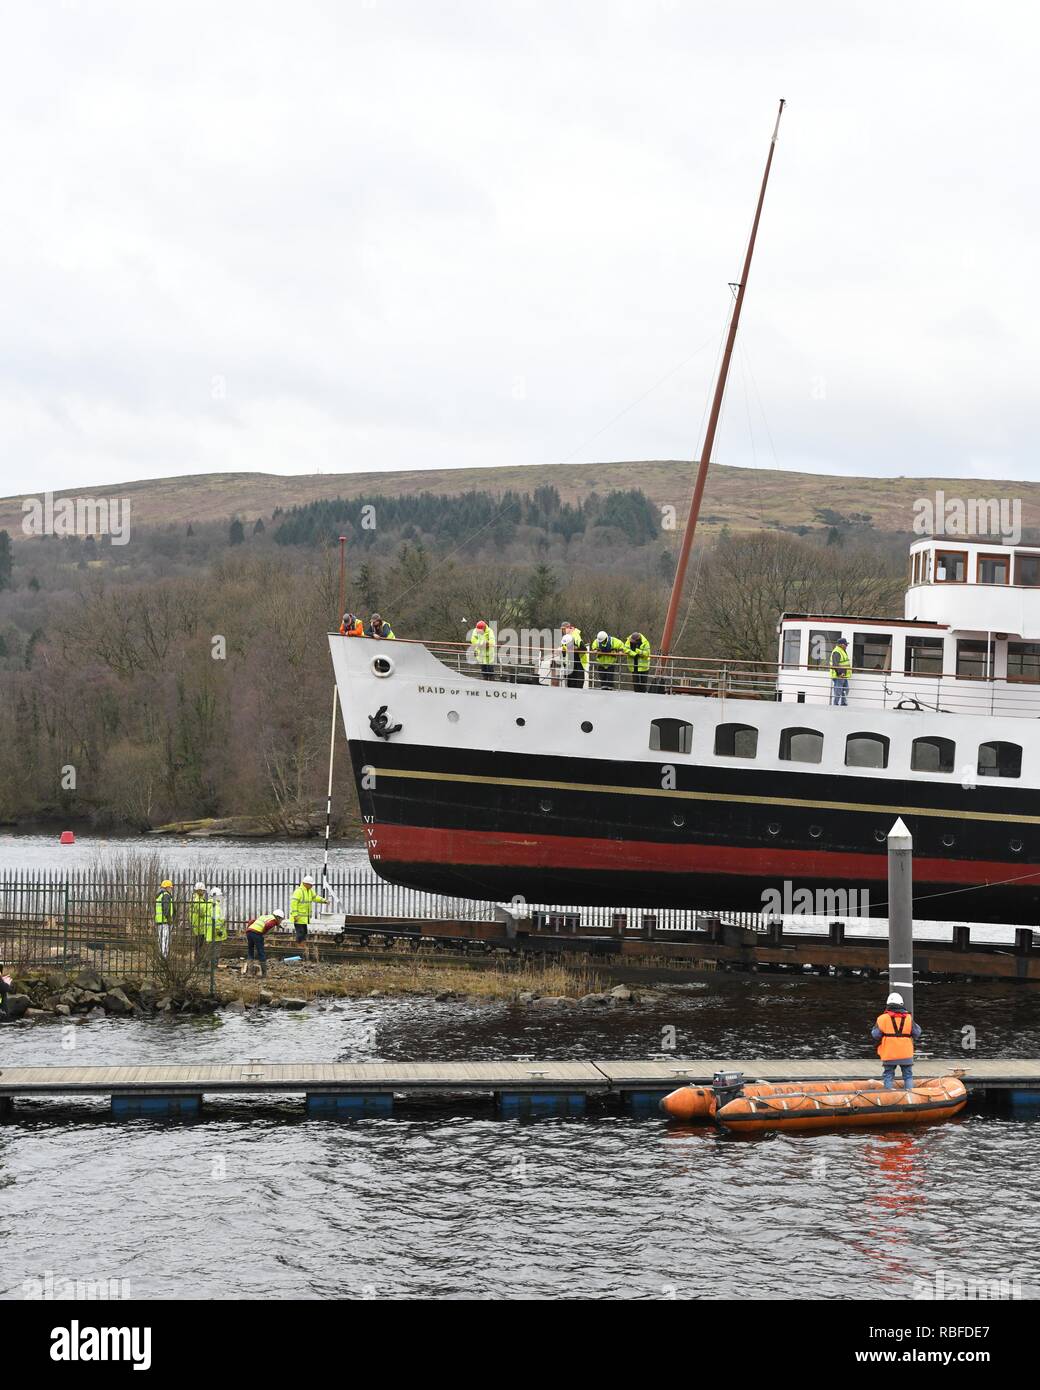 Balloch, Loch Lomond, UK. 10th Jan, 2019. UK. Attempts to remove the Maid of the Loch from Loch Lomond at Balloch today failed when the cradle which supported the ship weight snapped and the ship slipped back into the water. PS Maid of the Loch is the last paddle steamer built in Britain and was being removed for renovation and restoration purposes. Stock Photo